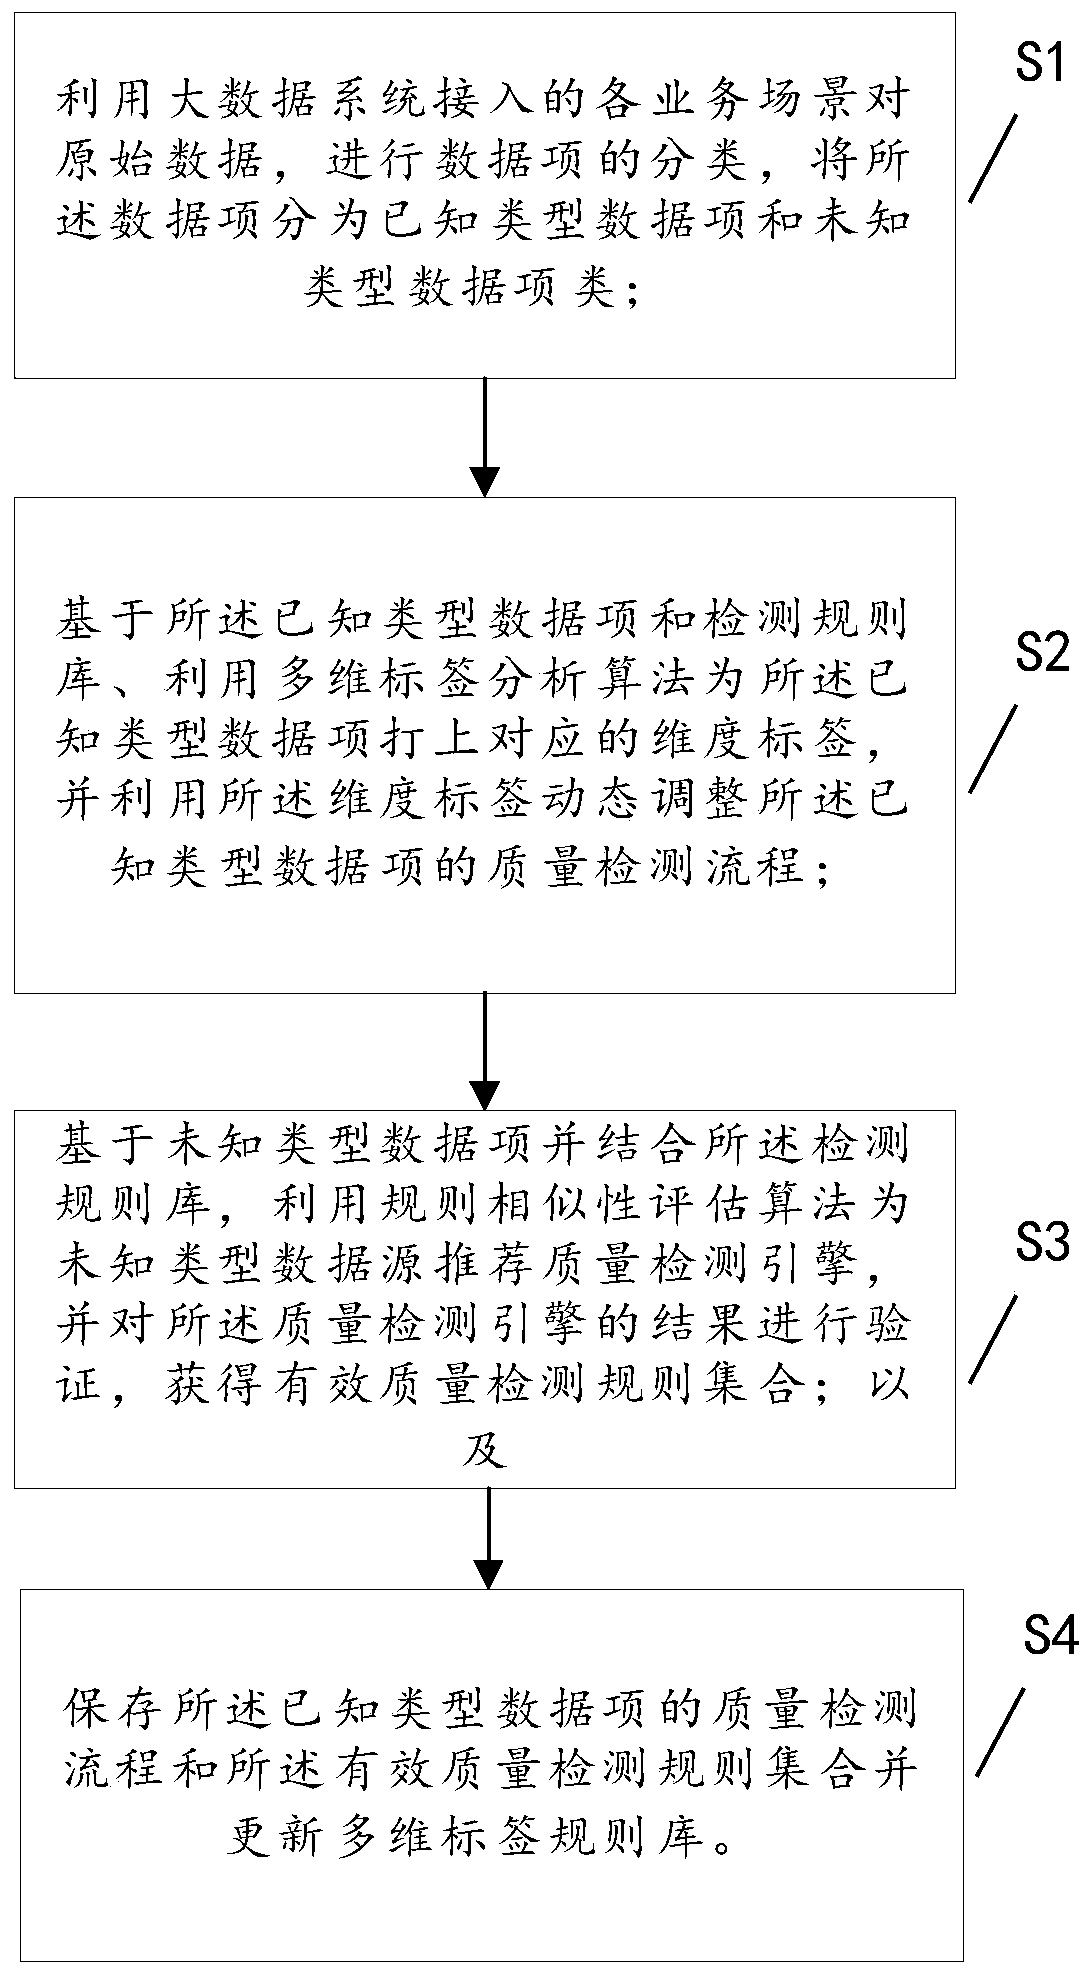 Data quality detection method and system based on multi-dimensional label